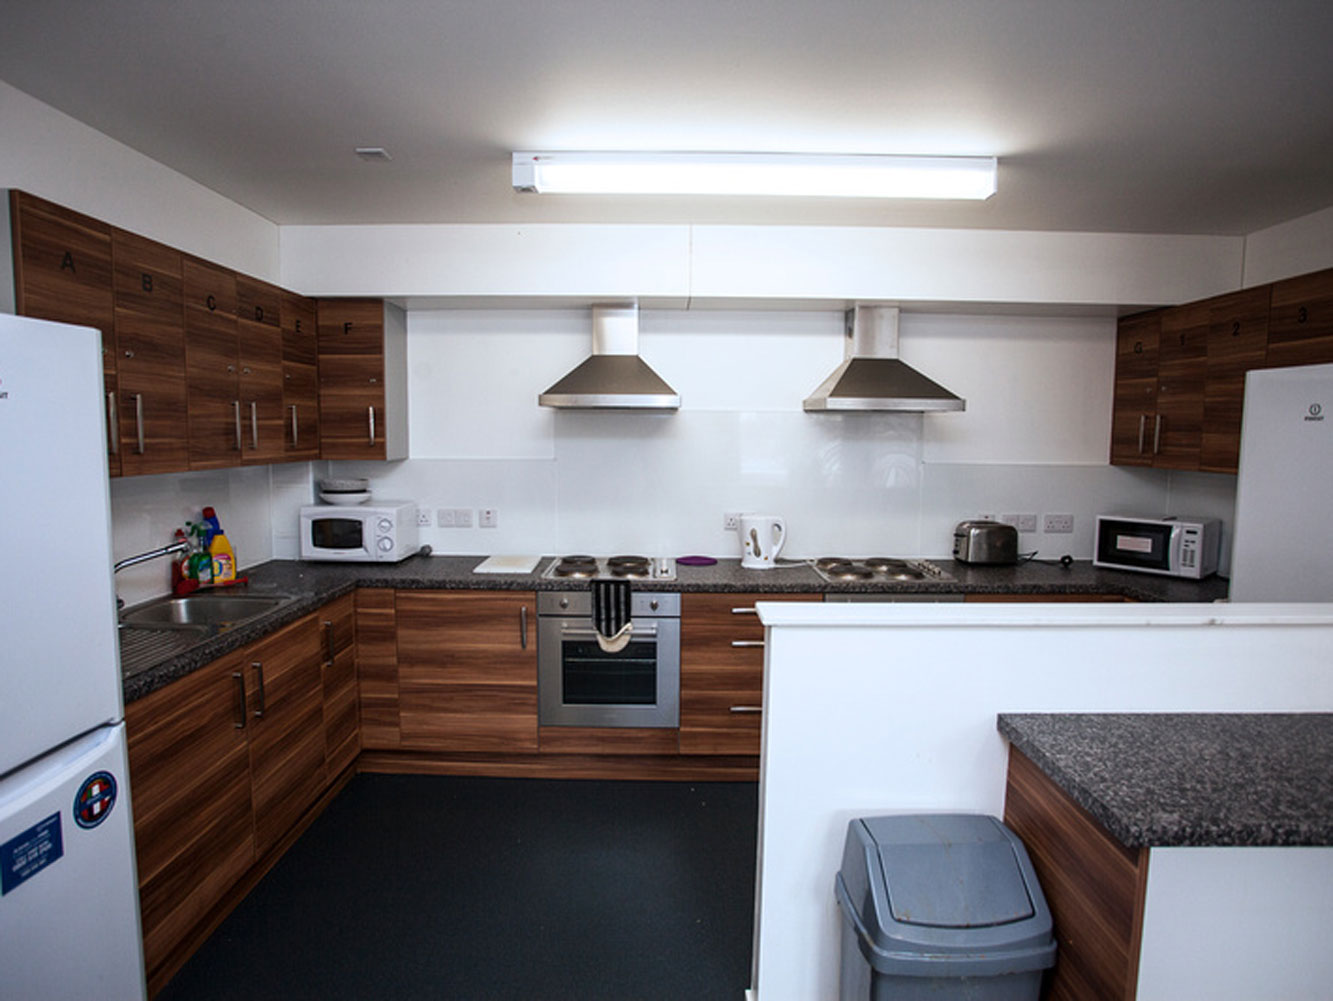 Fitted kitchen with fridge freezer, microwaves and oven